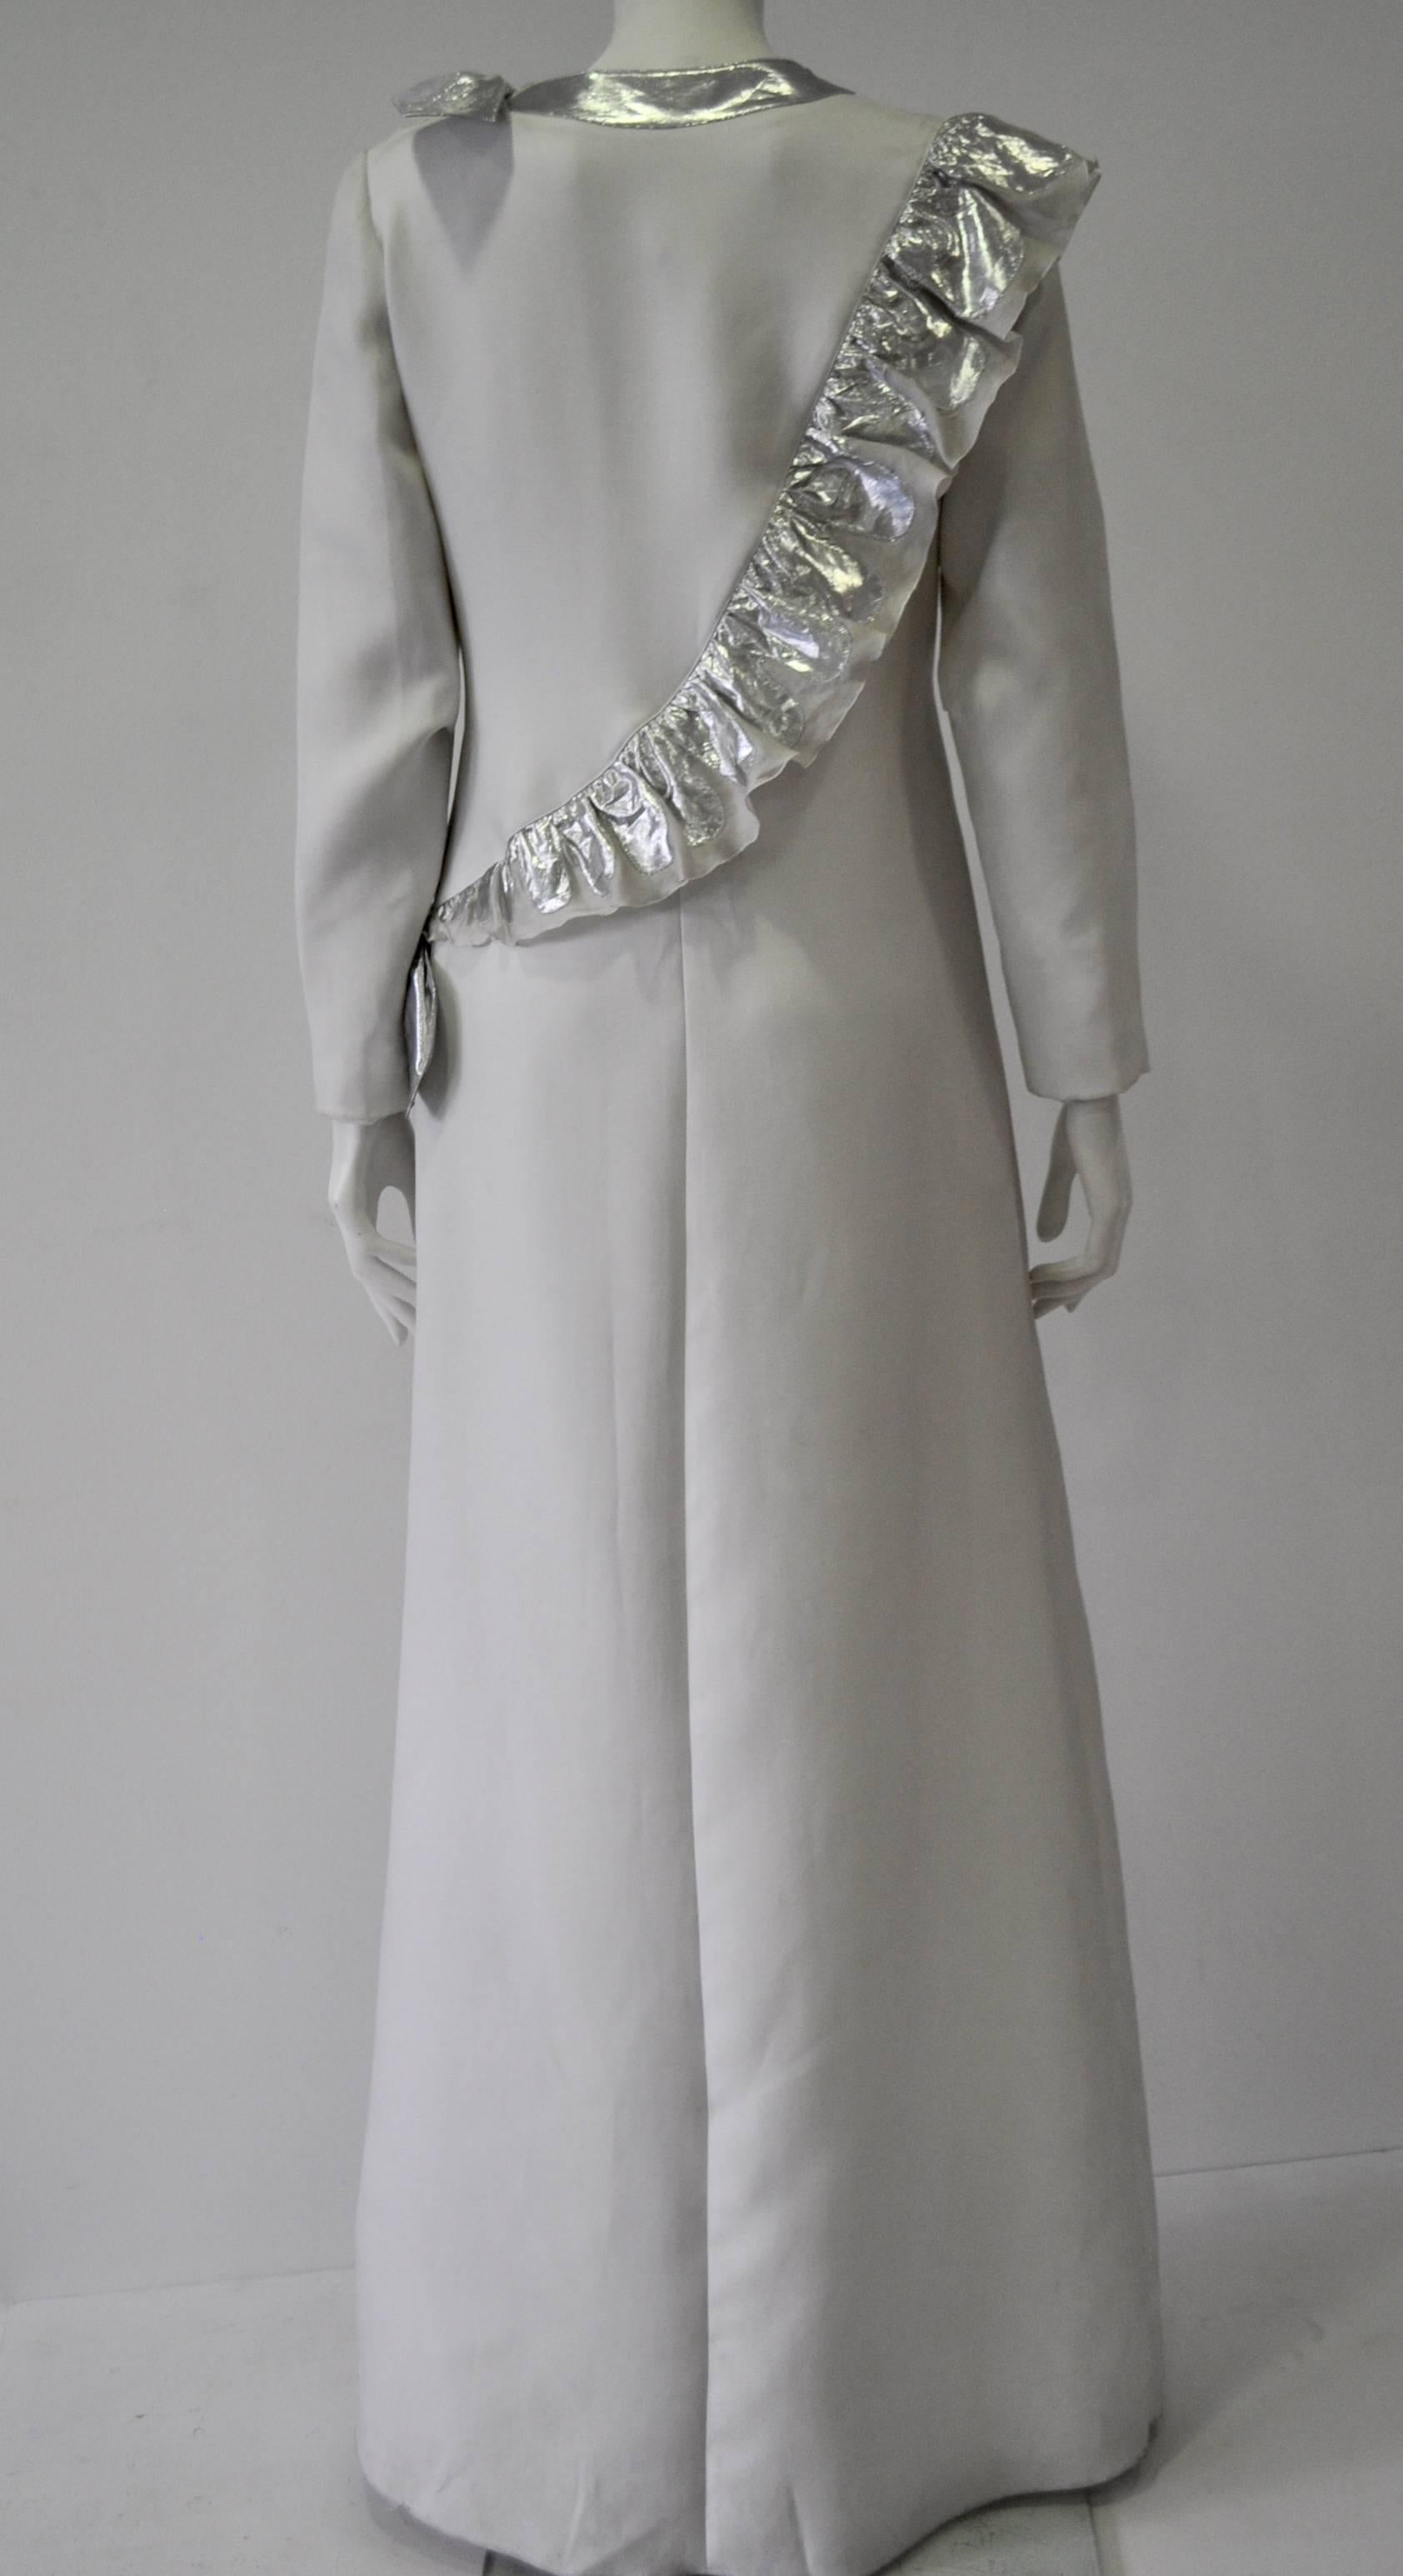 Gray Museum Quality Courreges Metallic Ruffle Sash Evening Gown For Sale